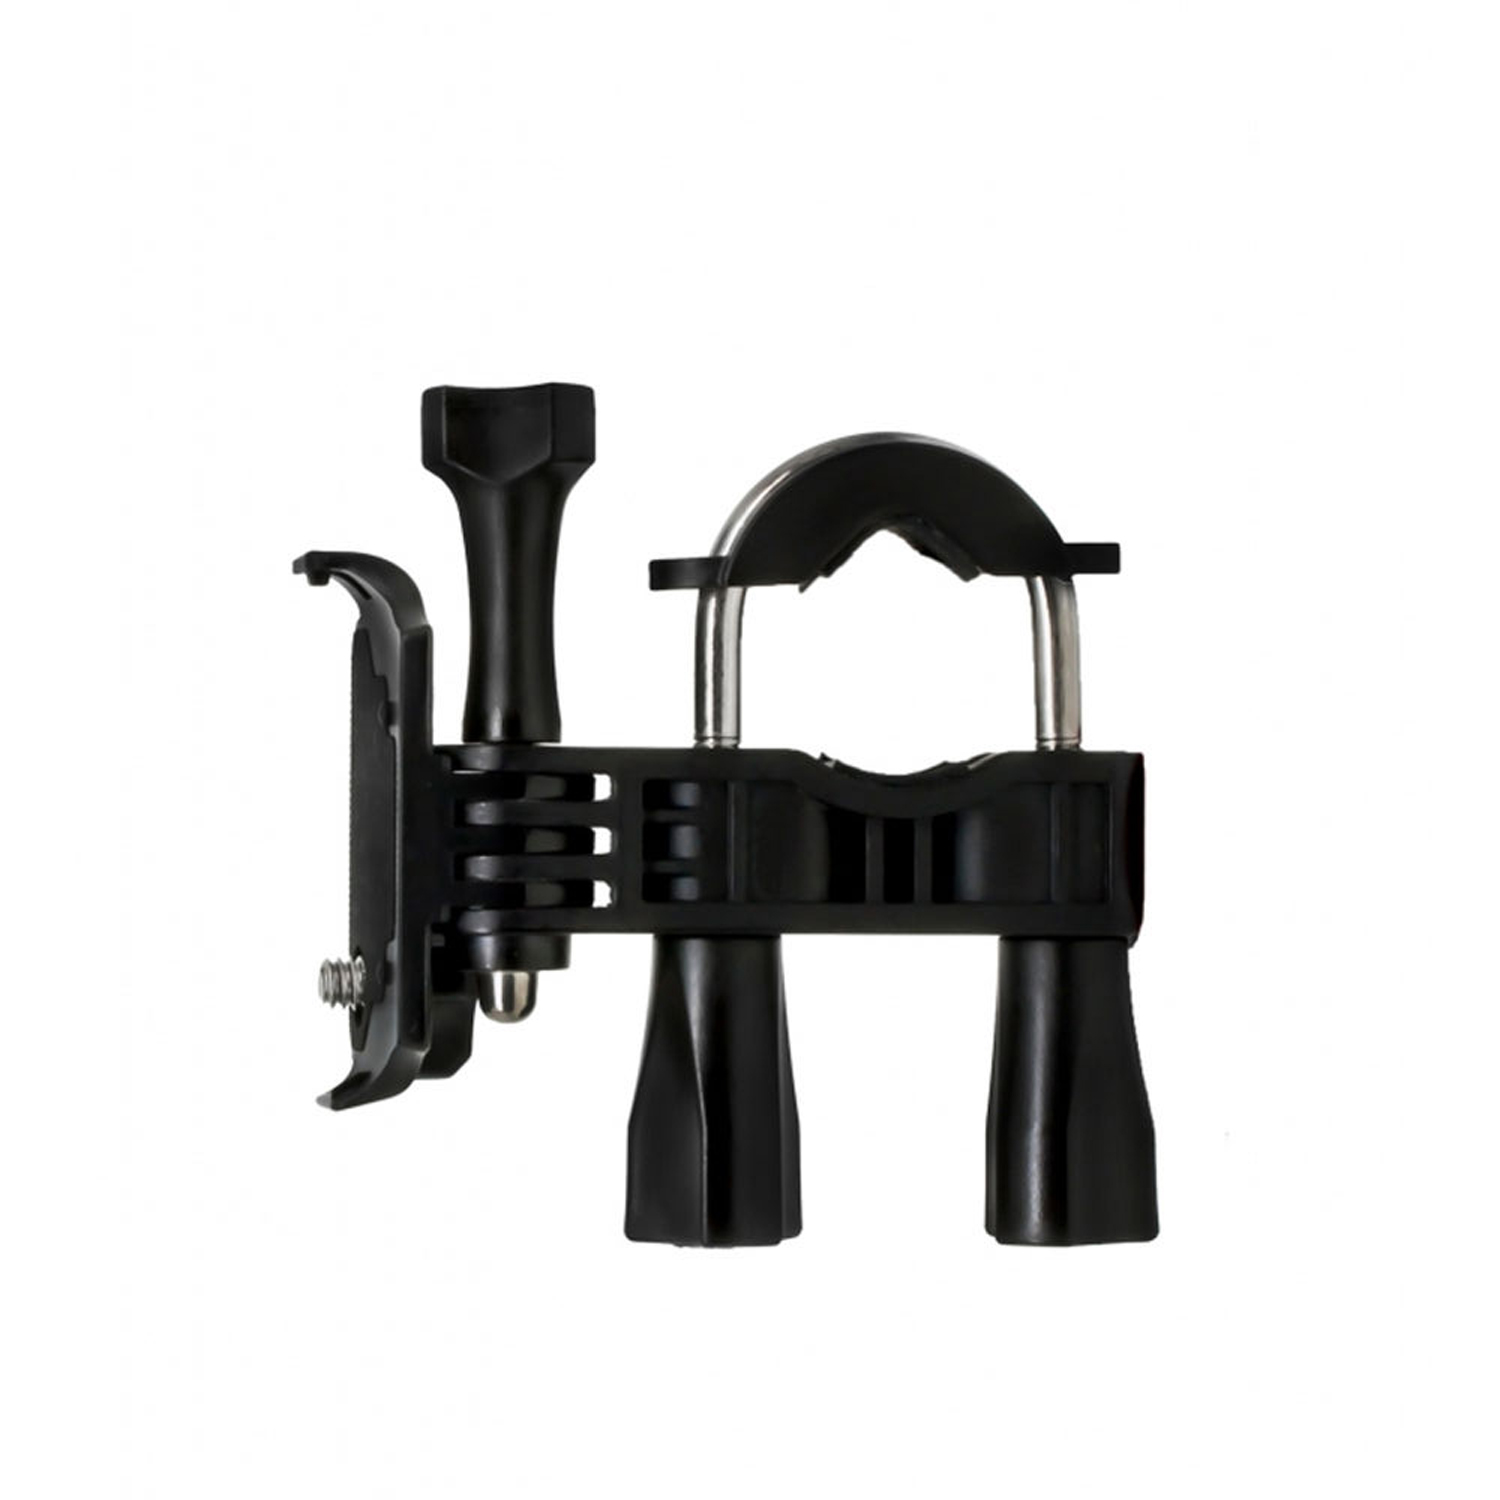 AEE-G02F Camera Mount for Bicycles